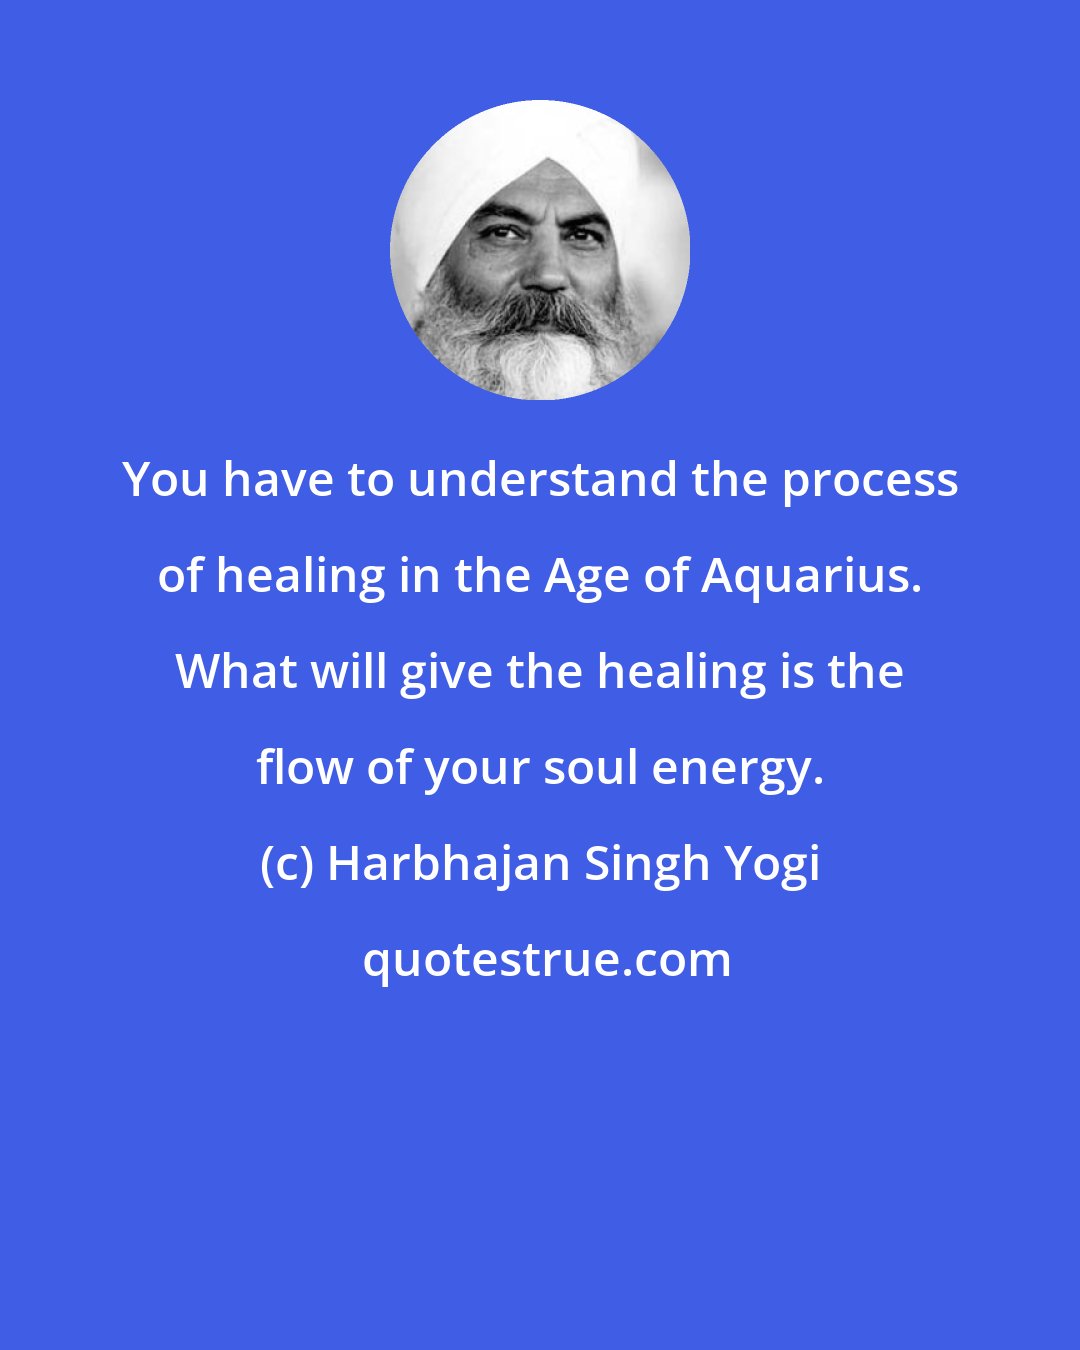 Harbhajan Singh Yogi: You have to understand the process of healing in the Age of Aquarius. What will give the healing is the flow of your soul energy.